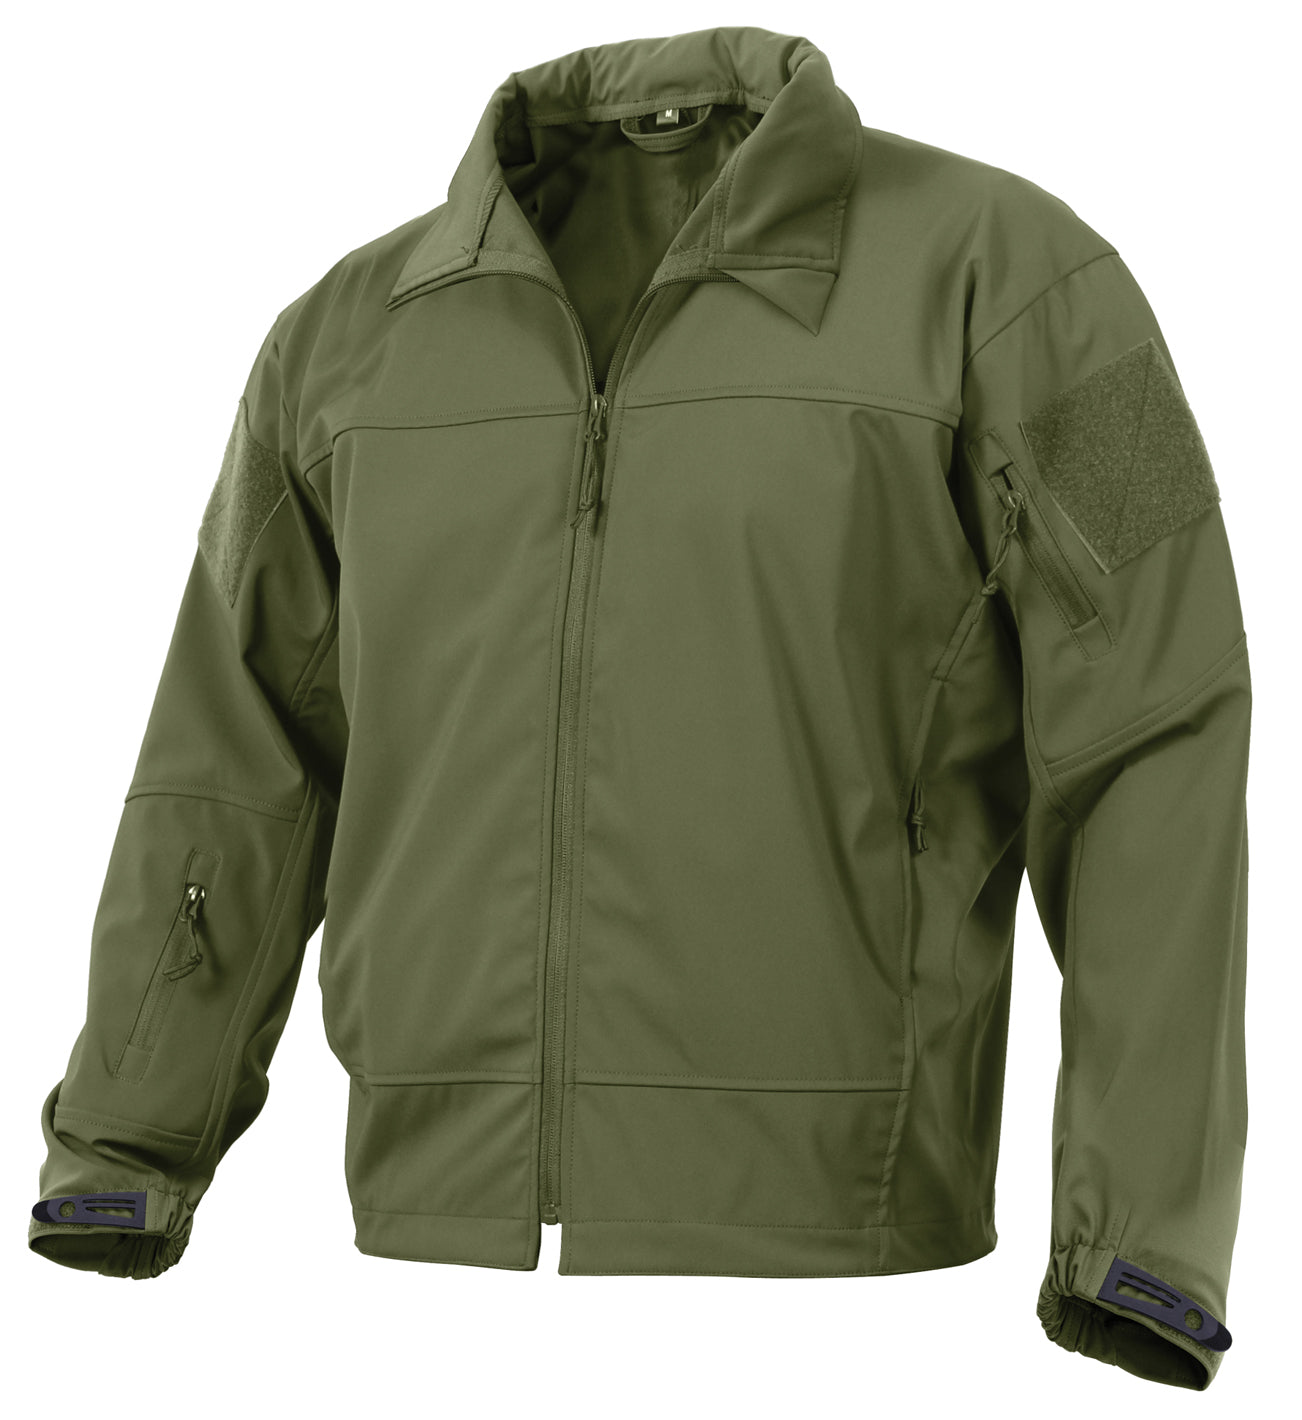 Rothco Covert Ops Lightweight Soft Shell Jacket Olive Drab Men's Tactical Jacket